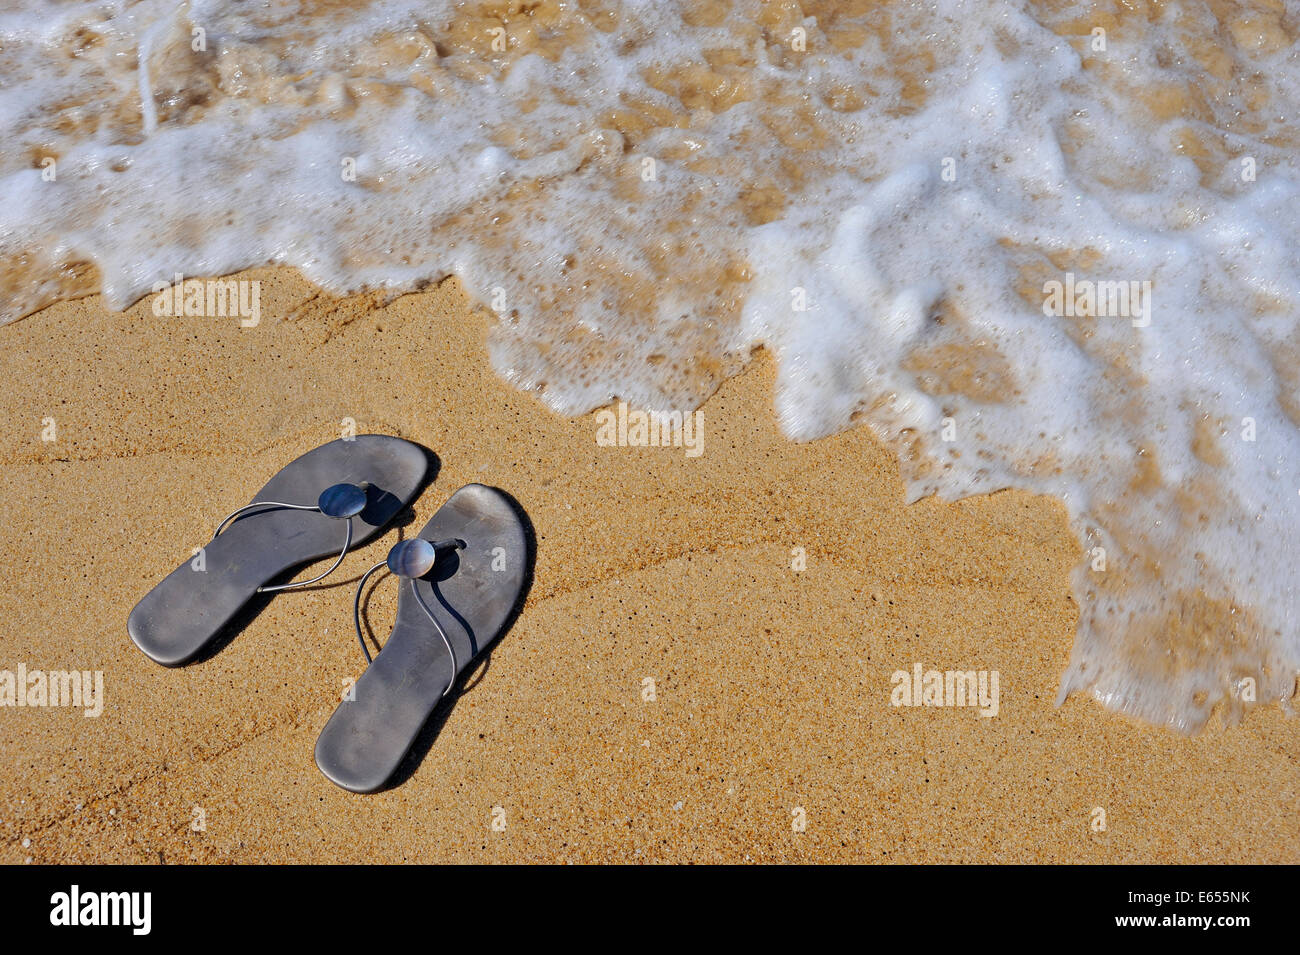 Flip-flops on a beach at the water's edge Stock Photo